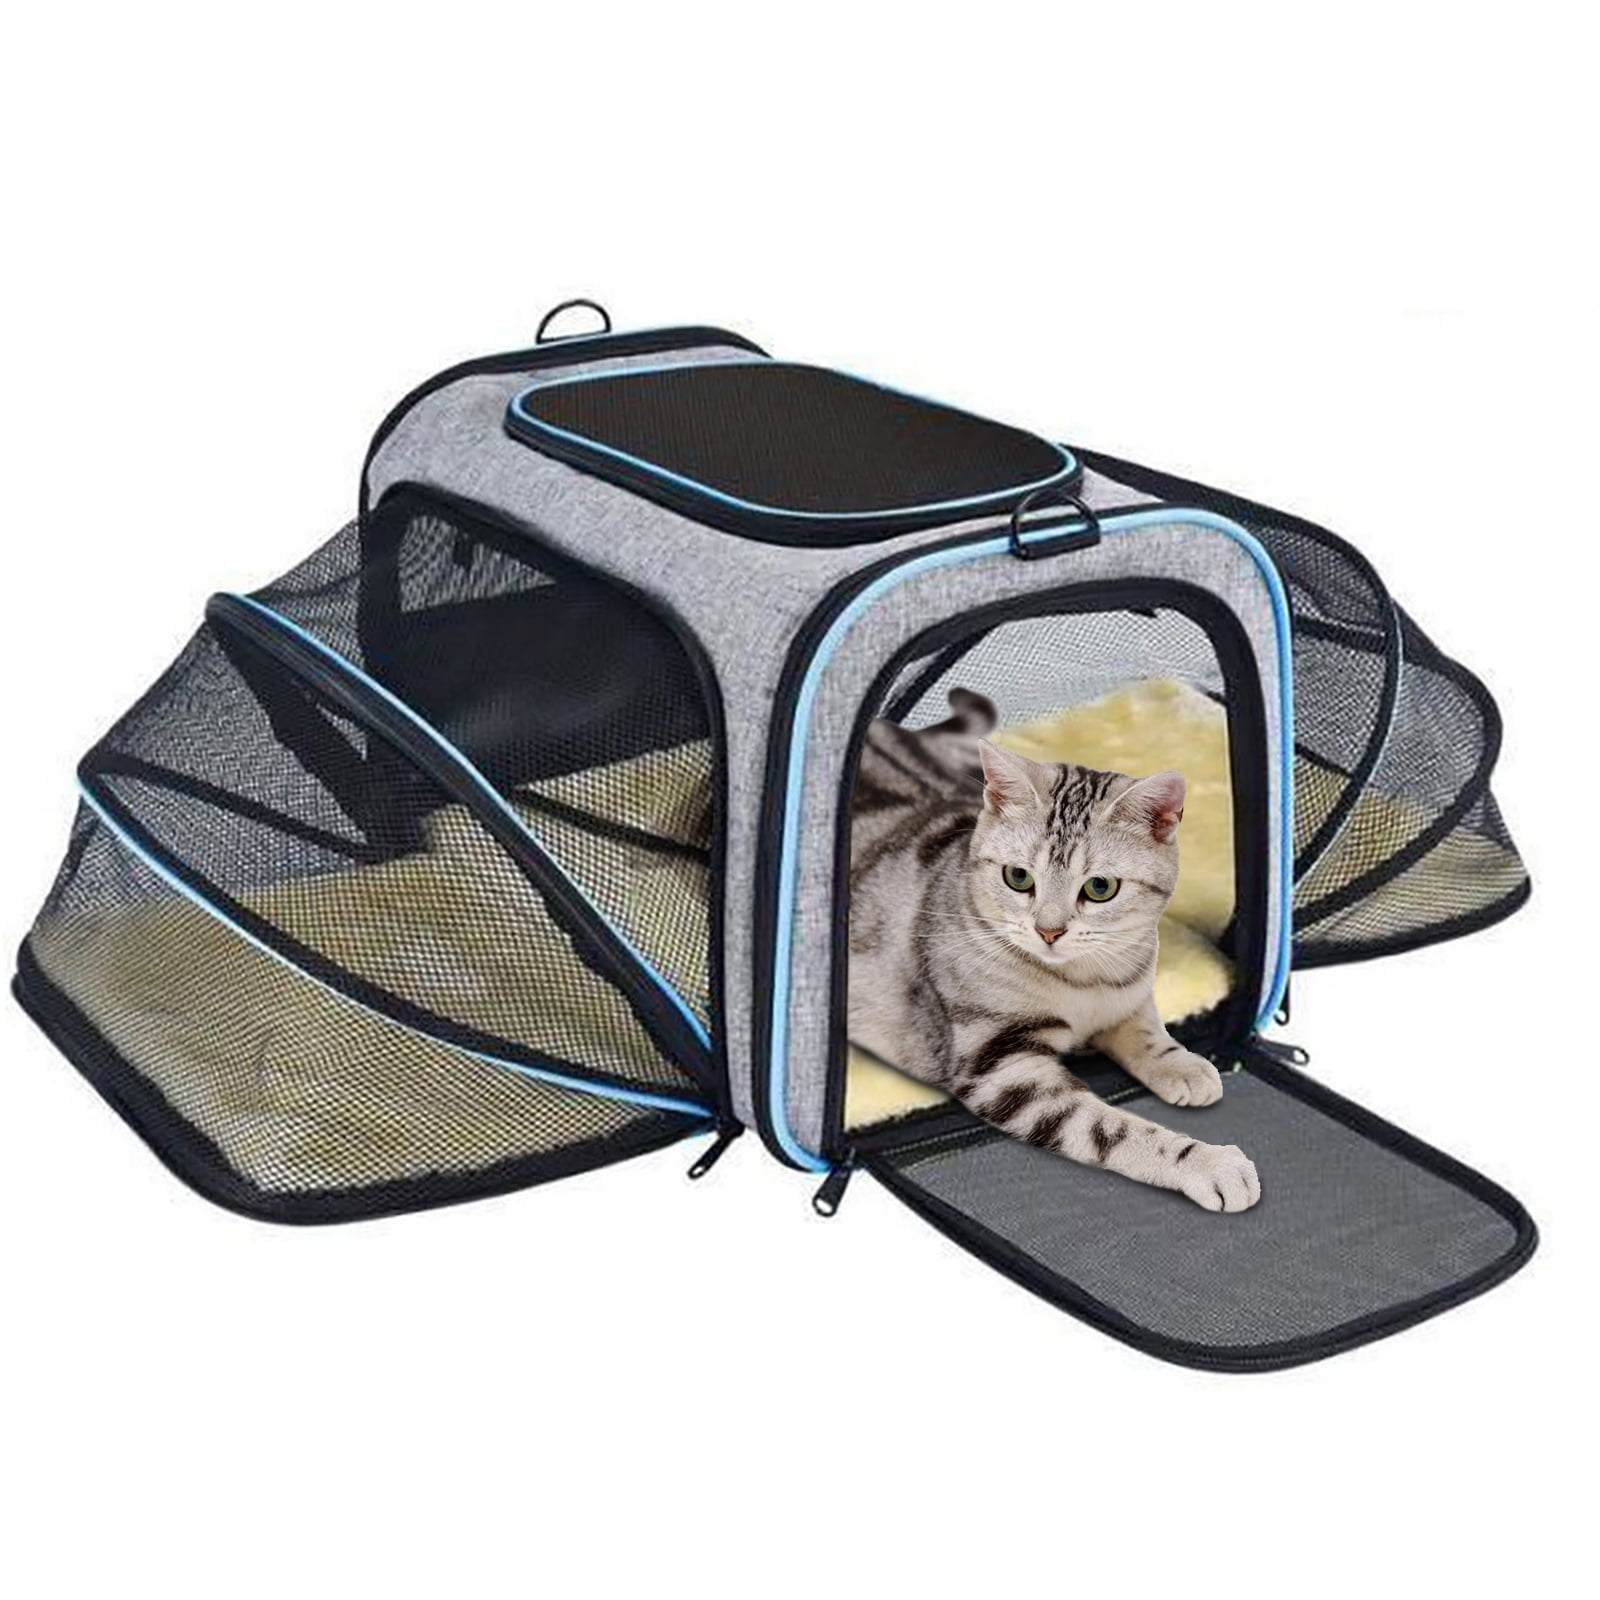 Top tasta Cat Dog Carrier for Small Medium Cats Puppies up to 20